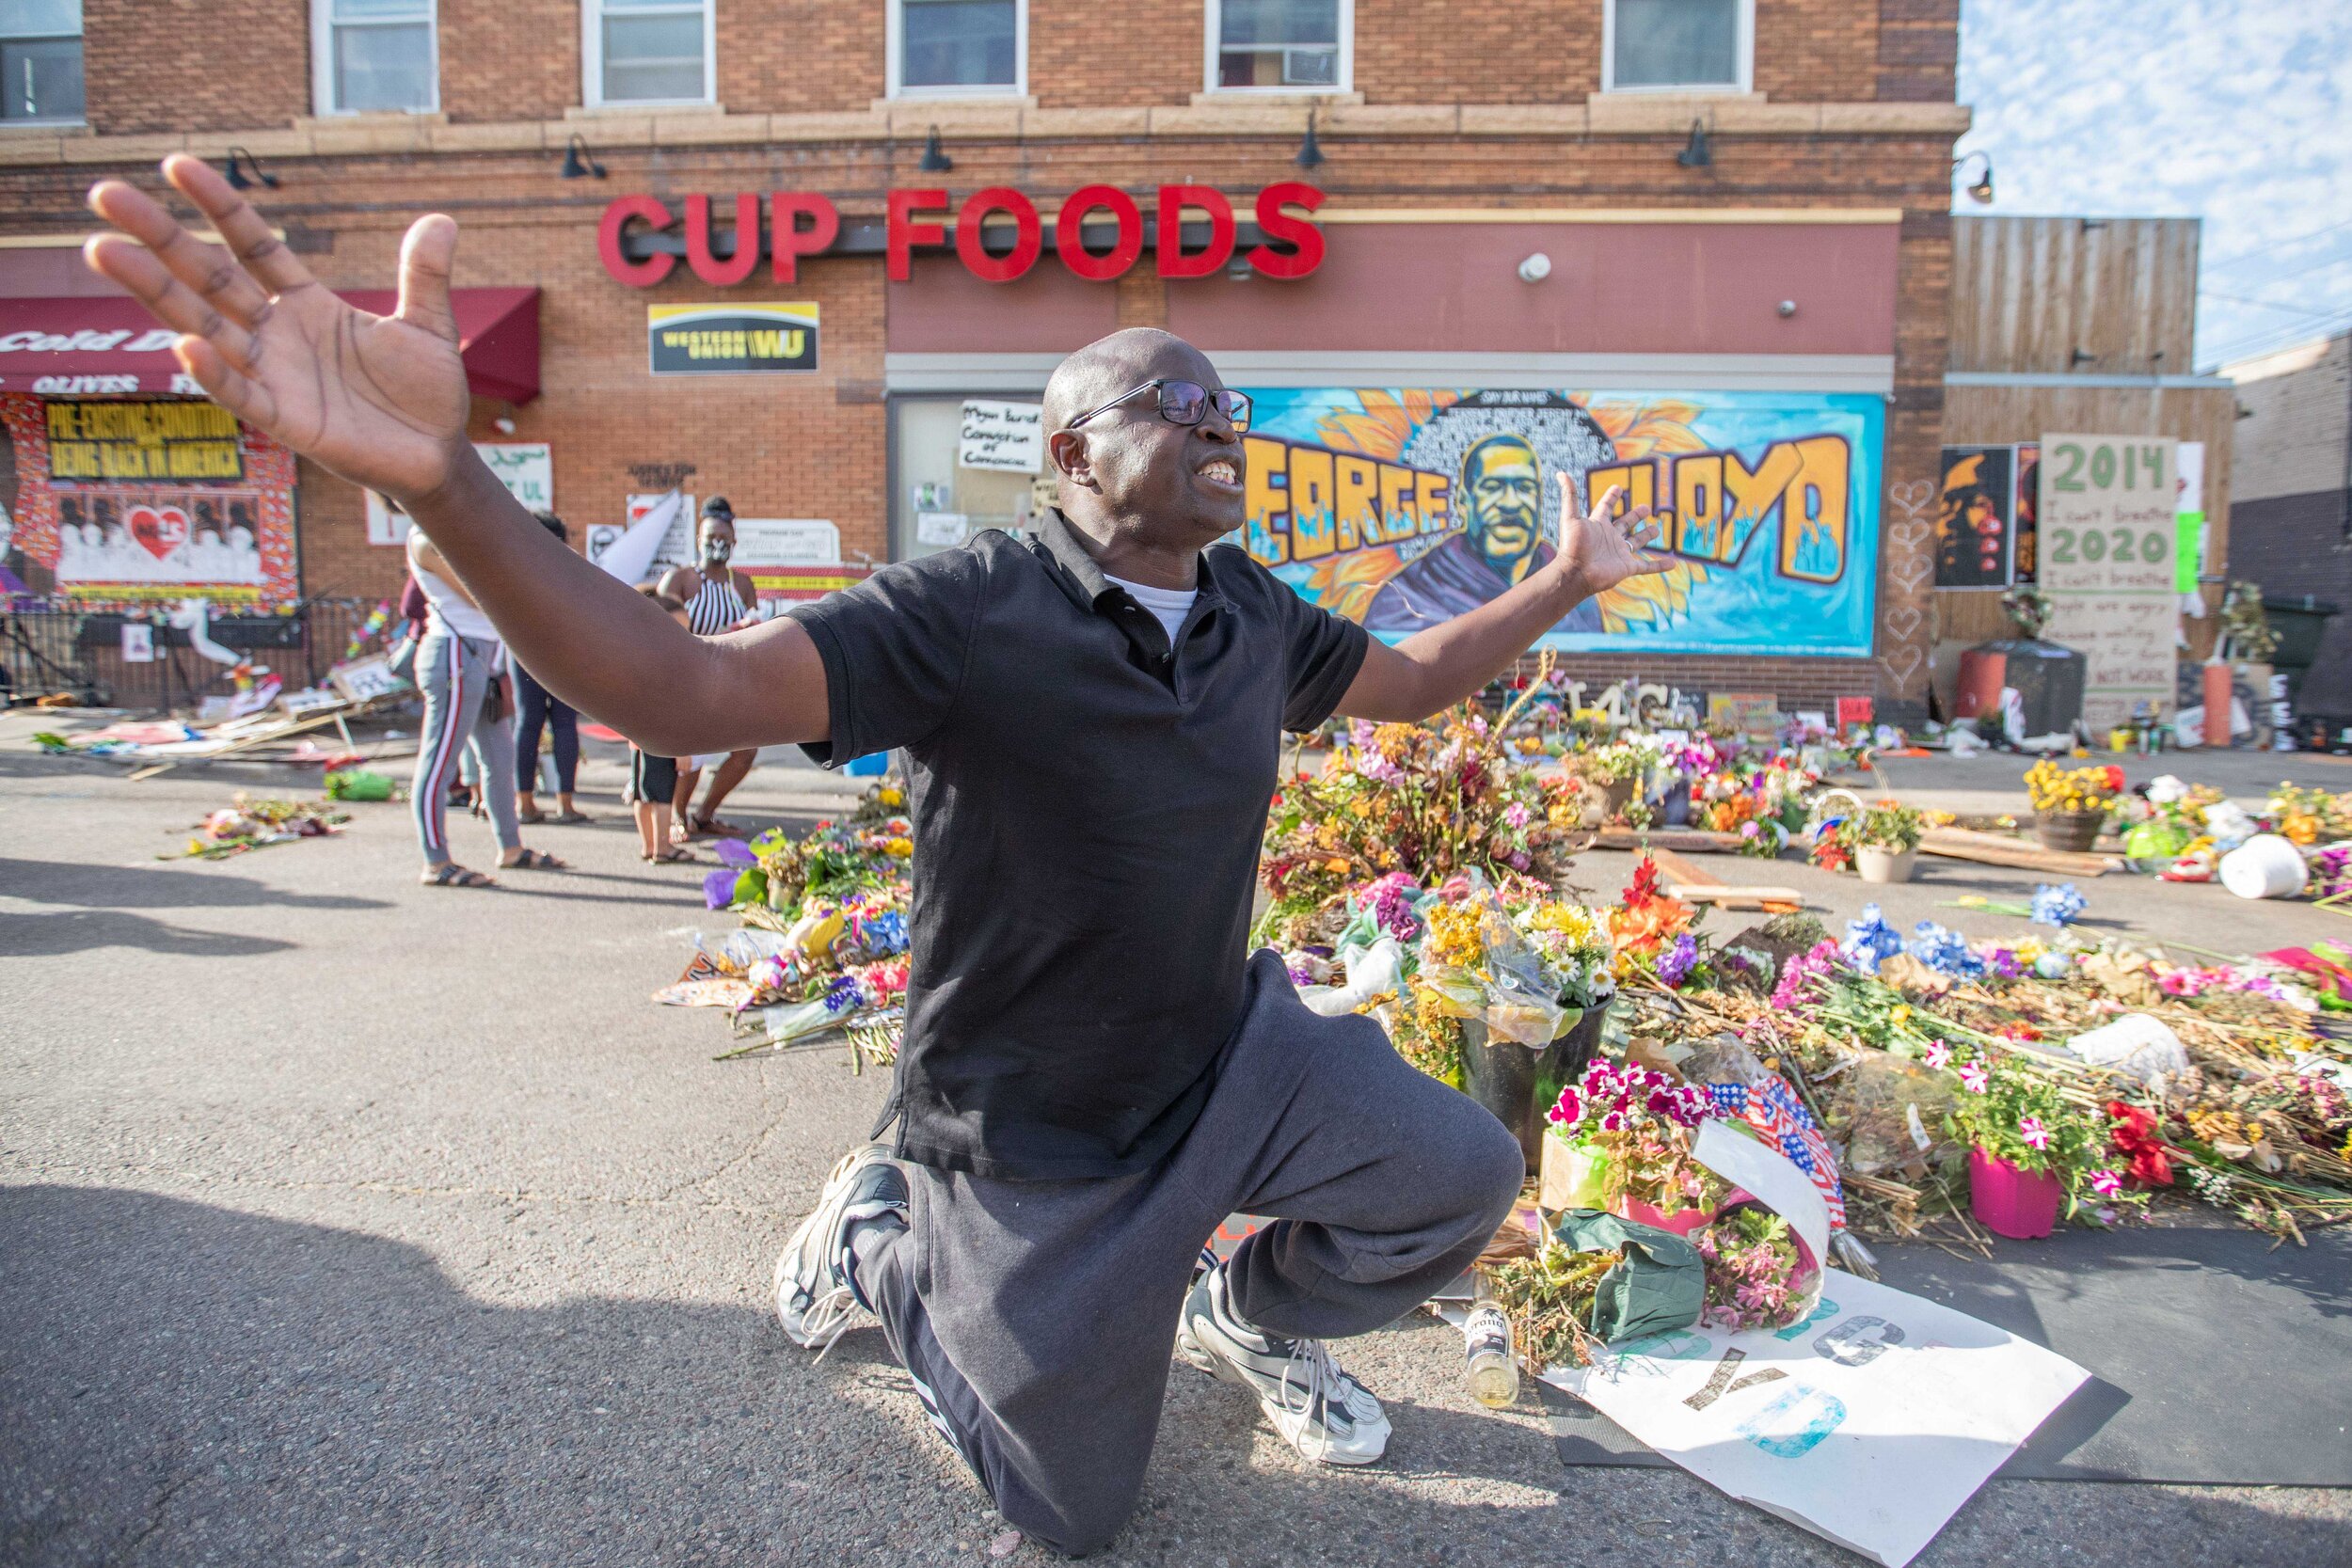  A preacher holds his hands out in prayer at the George Floyd memorial in front of Cup Foods at the intersection of Chicago Avenue and E 38th St in Minneapolos, Minnesota on Jun 14, 2020. 